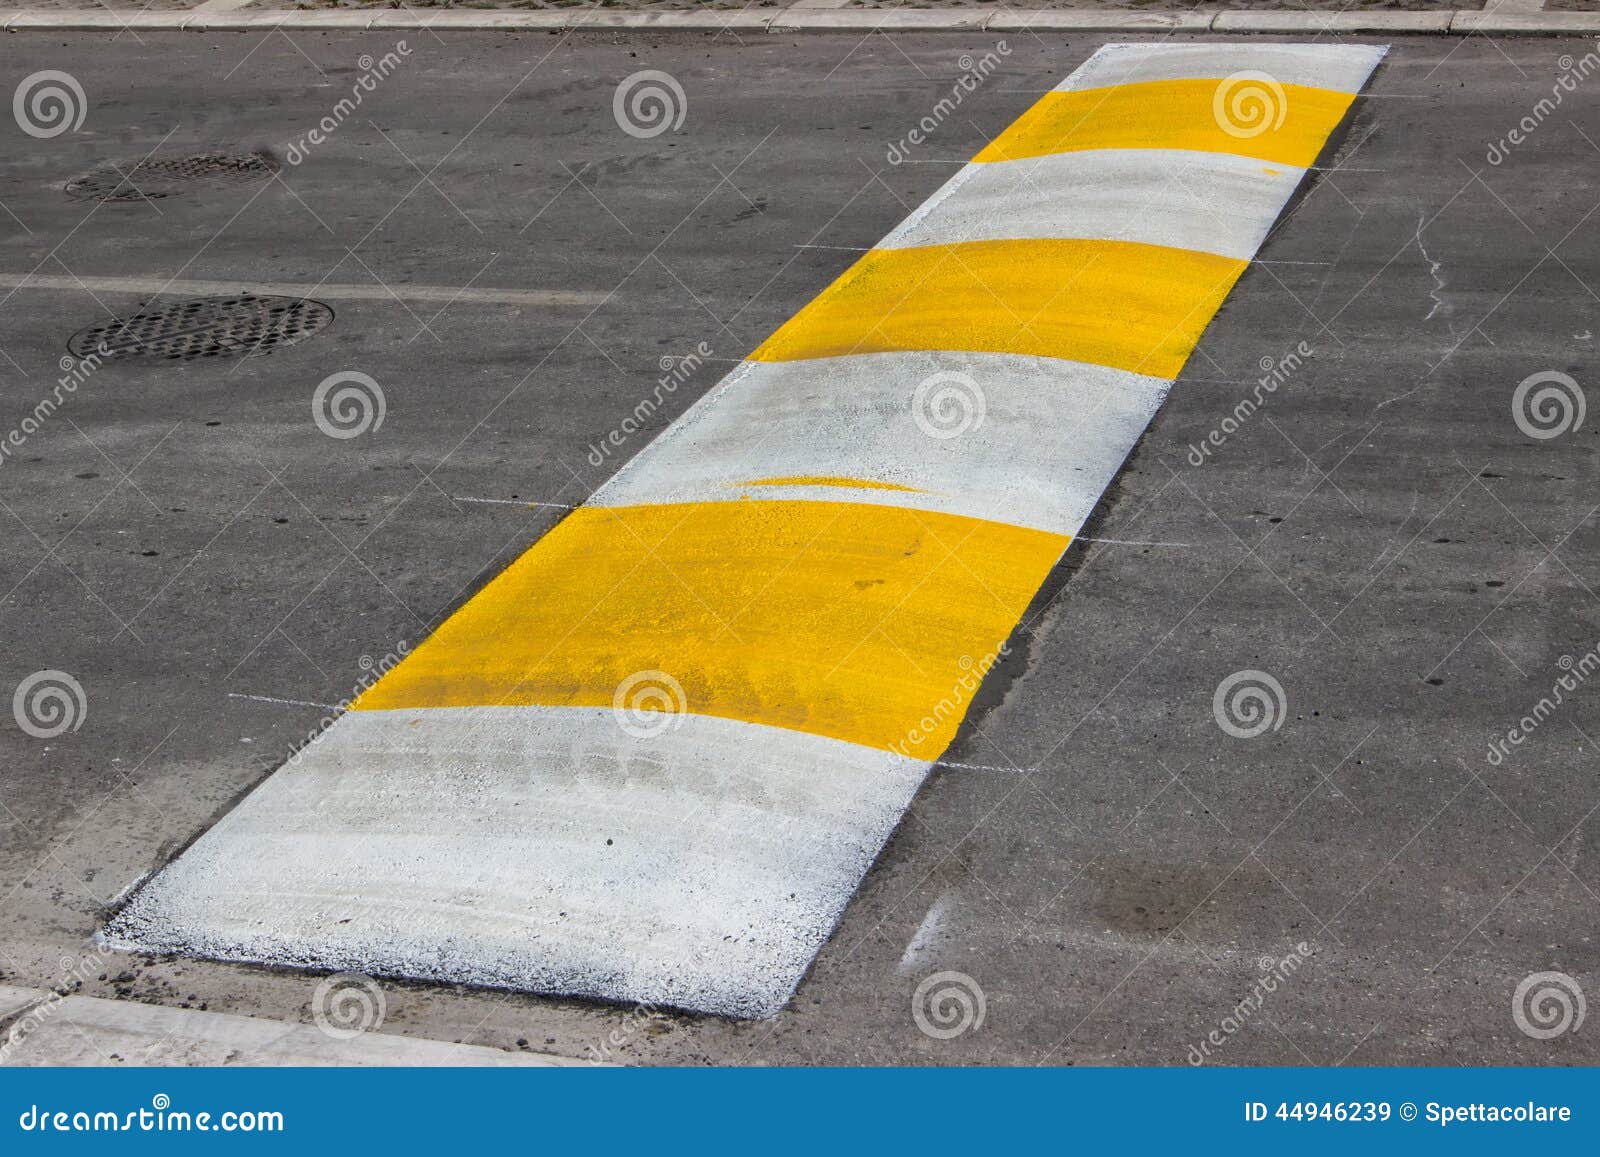 Freshly Painted Speed Bump For Slowing Traffic Near School Stock Photo - Image: 44946239